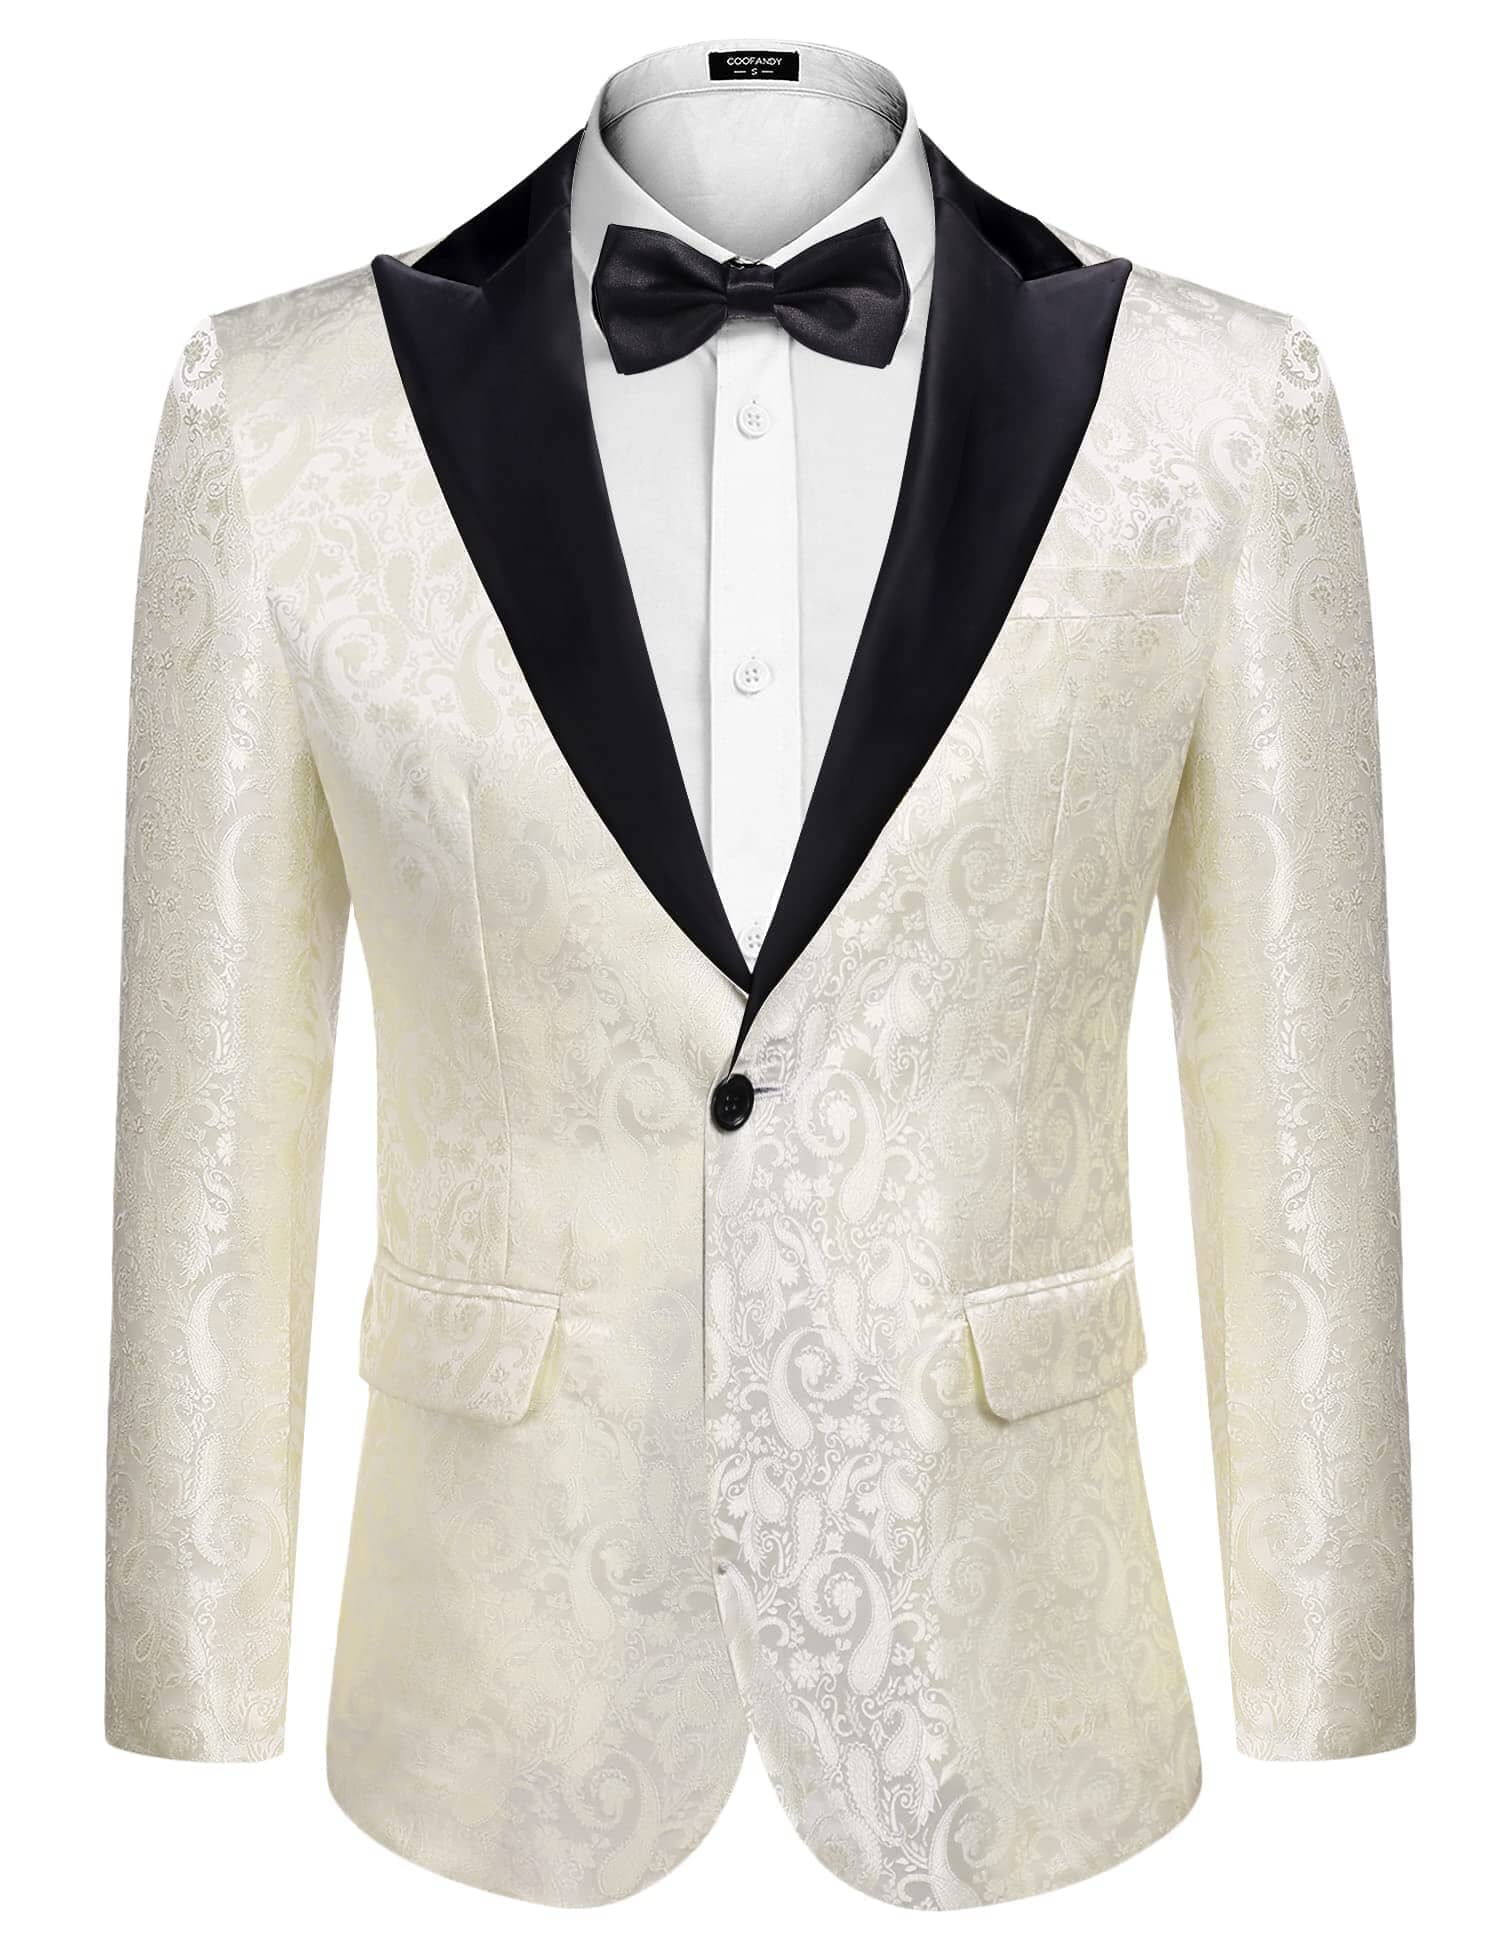 Coofandy Floral Party Tuxedo (US Only) Blazer coofandy White XS 